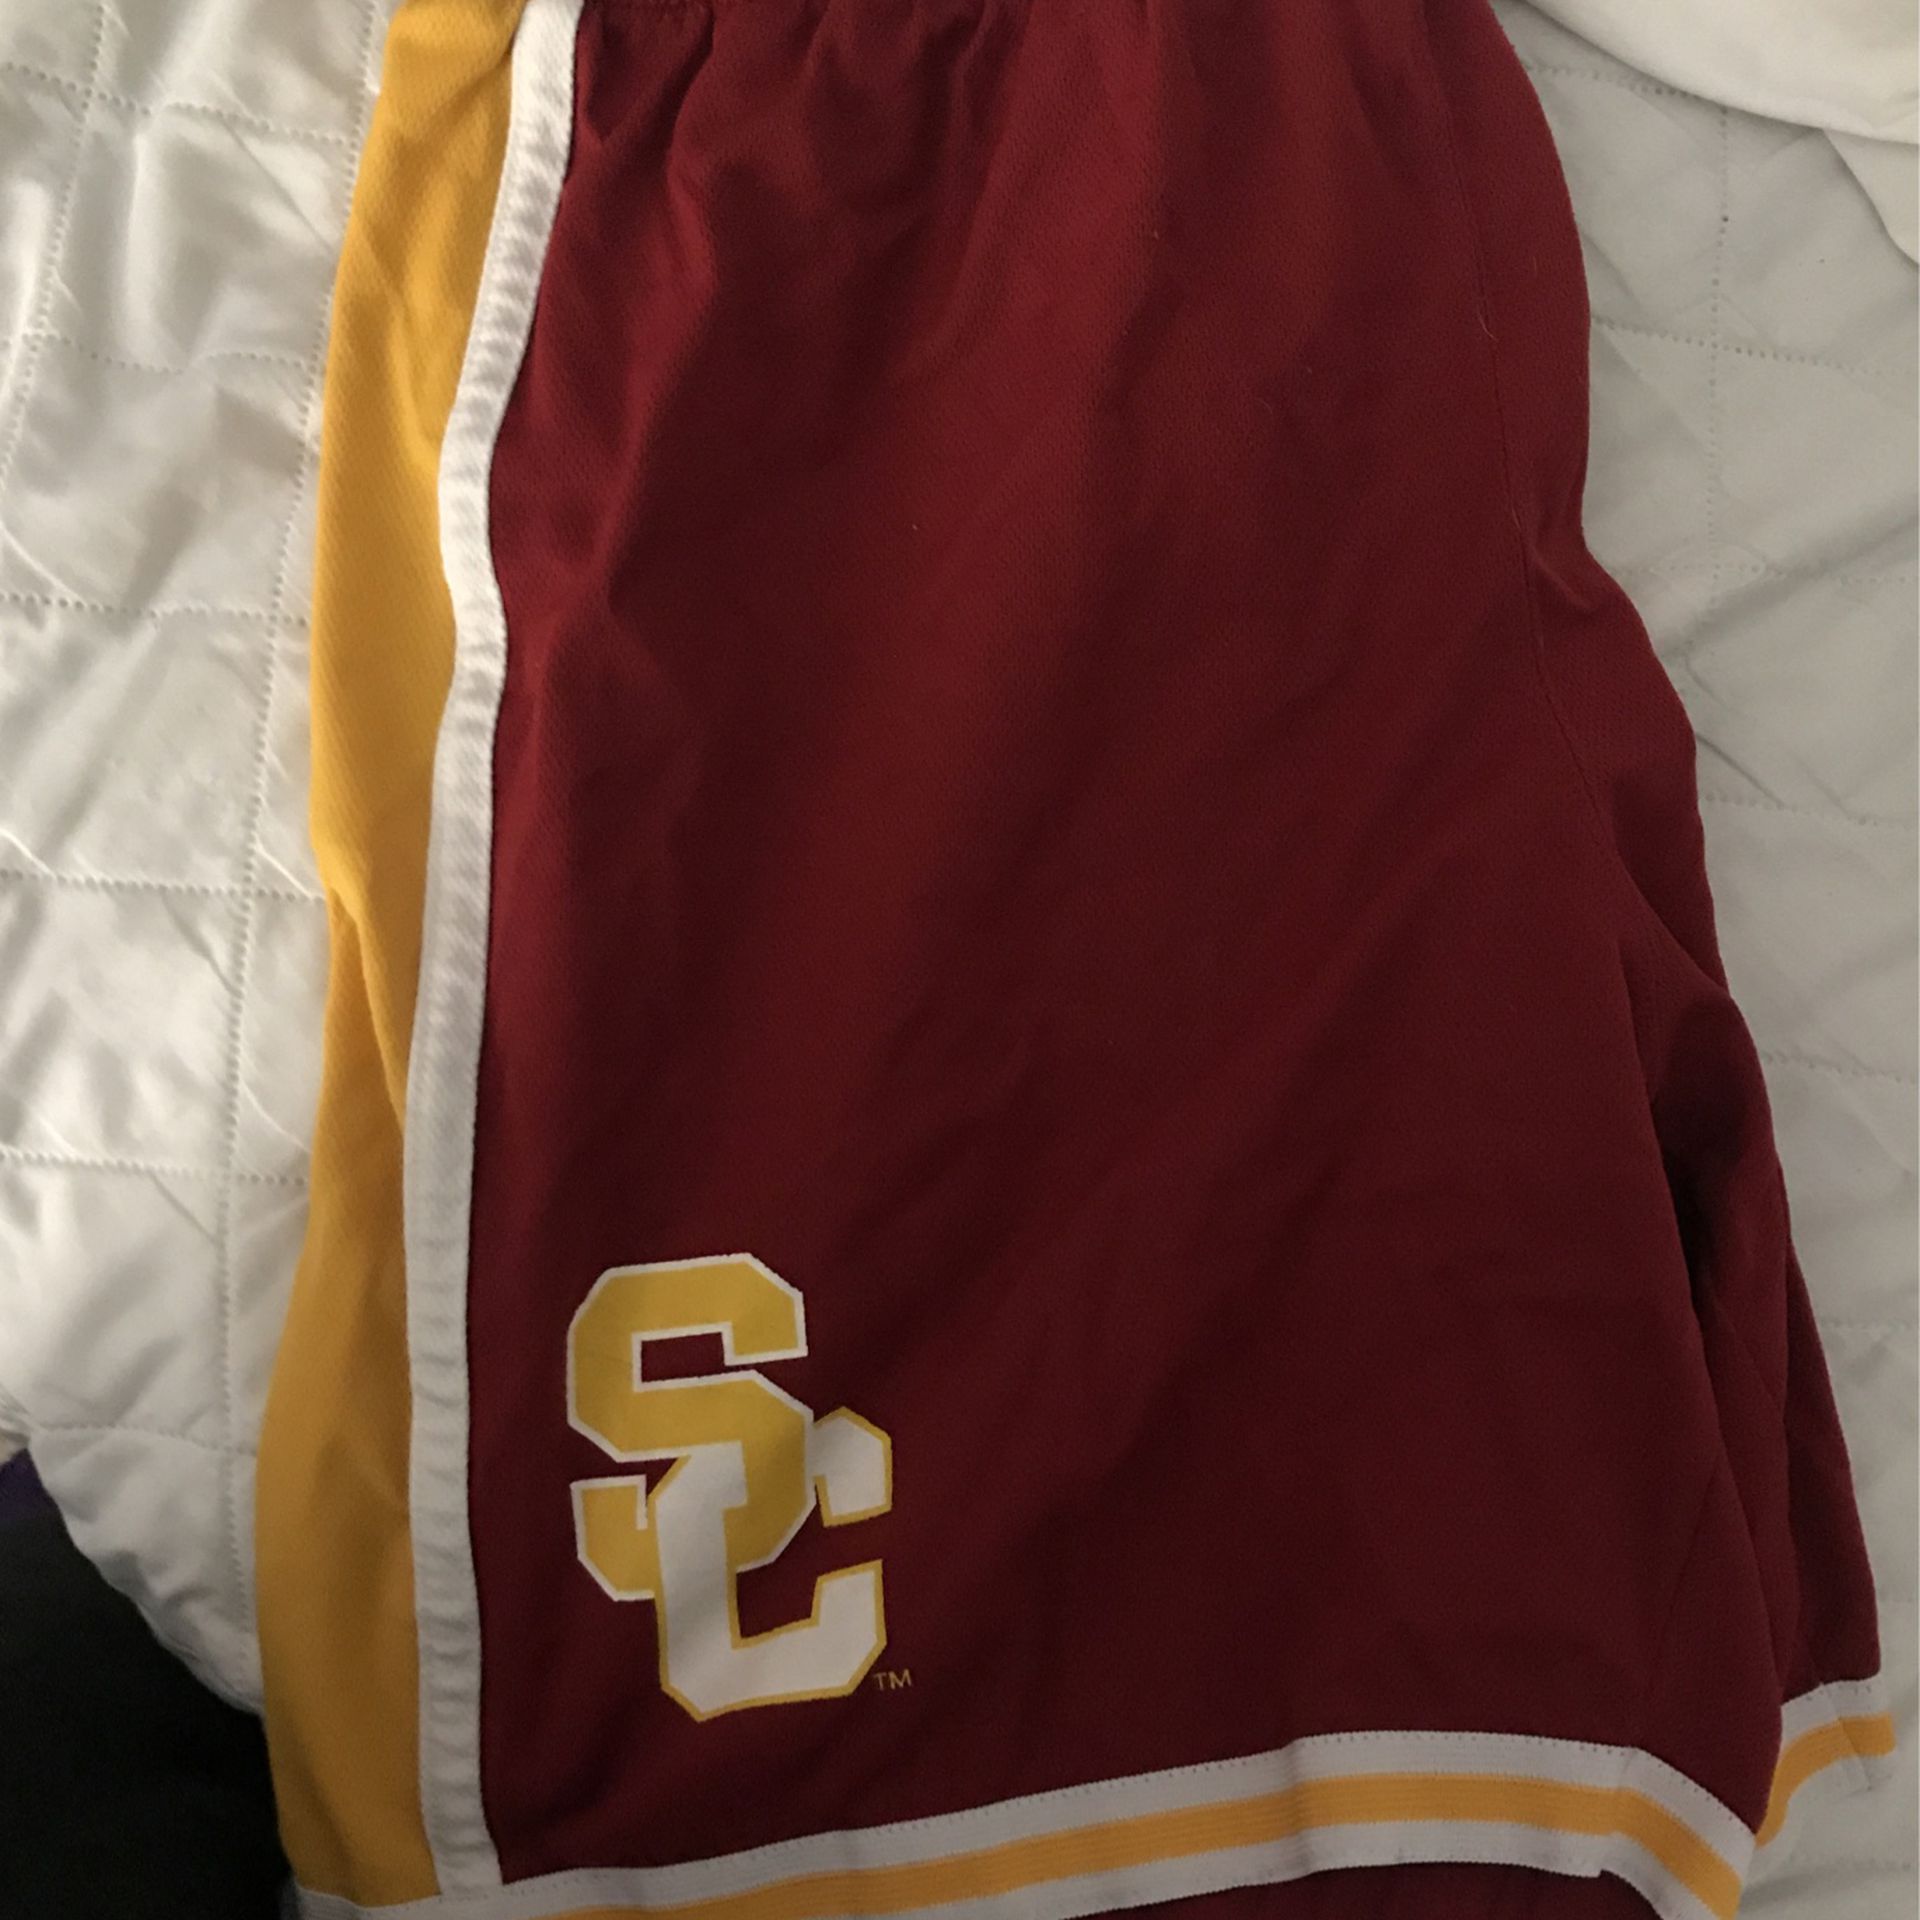 Vintage NBA basketball shorts for Sale in Ellicott, NY - OfferUp